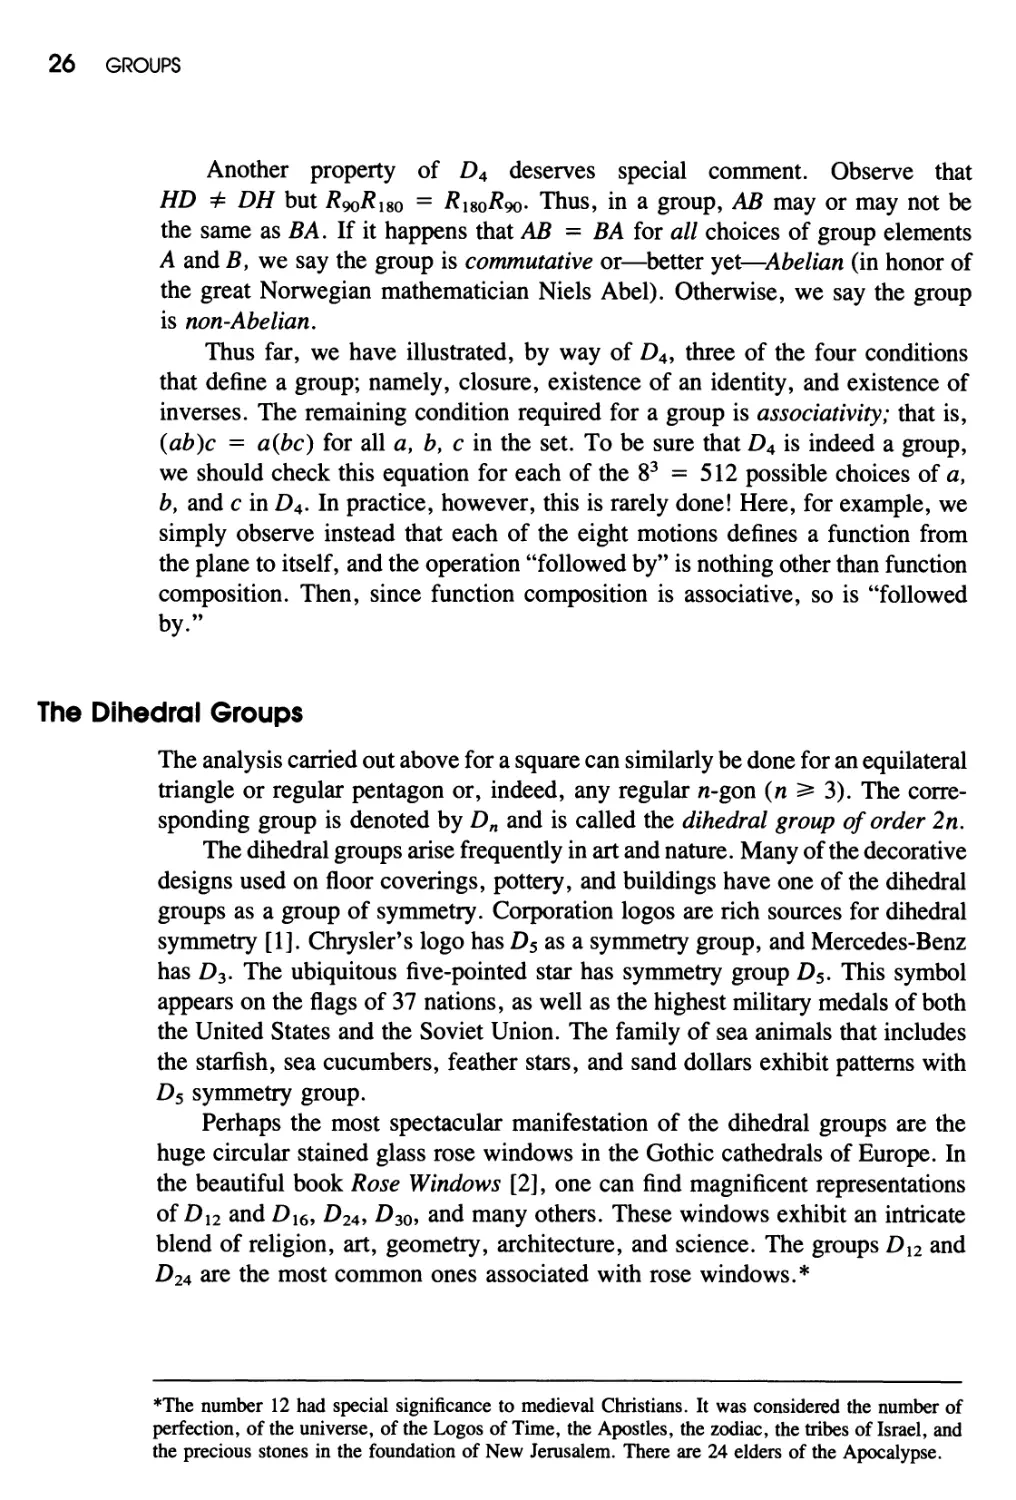 The Dihedral Groups